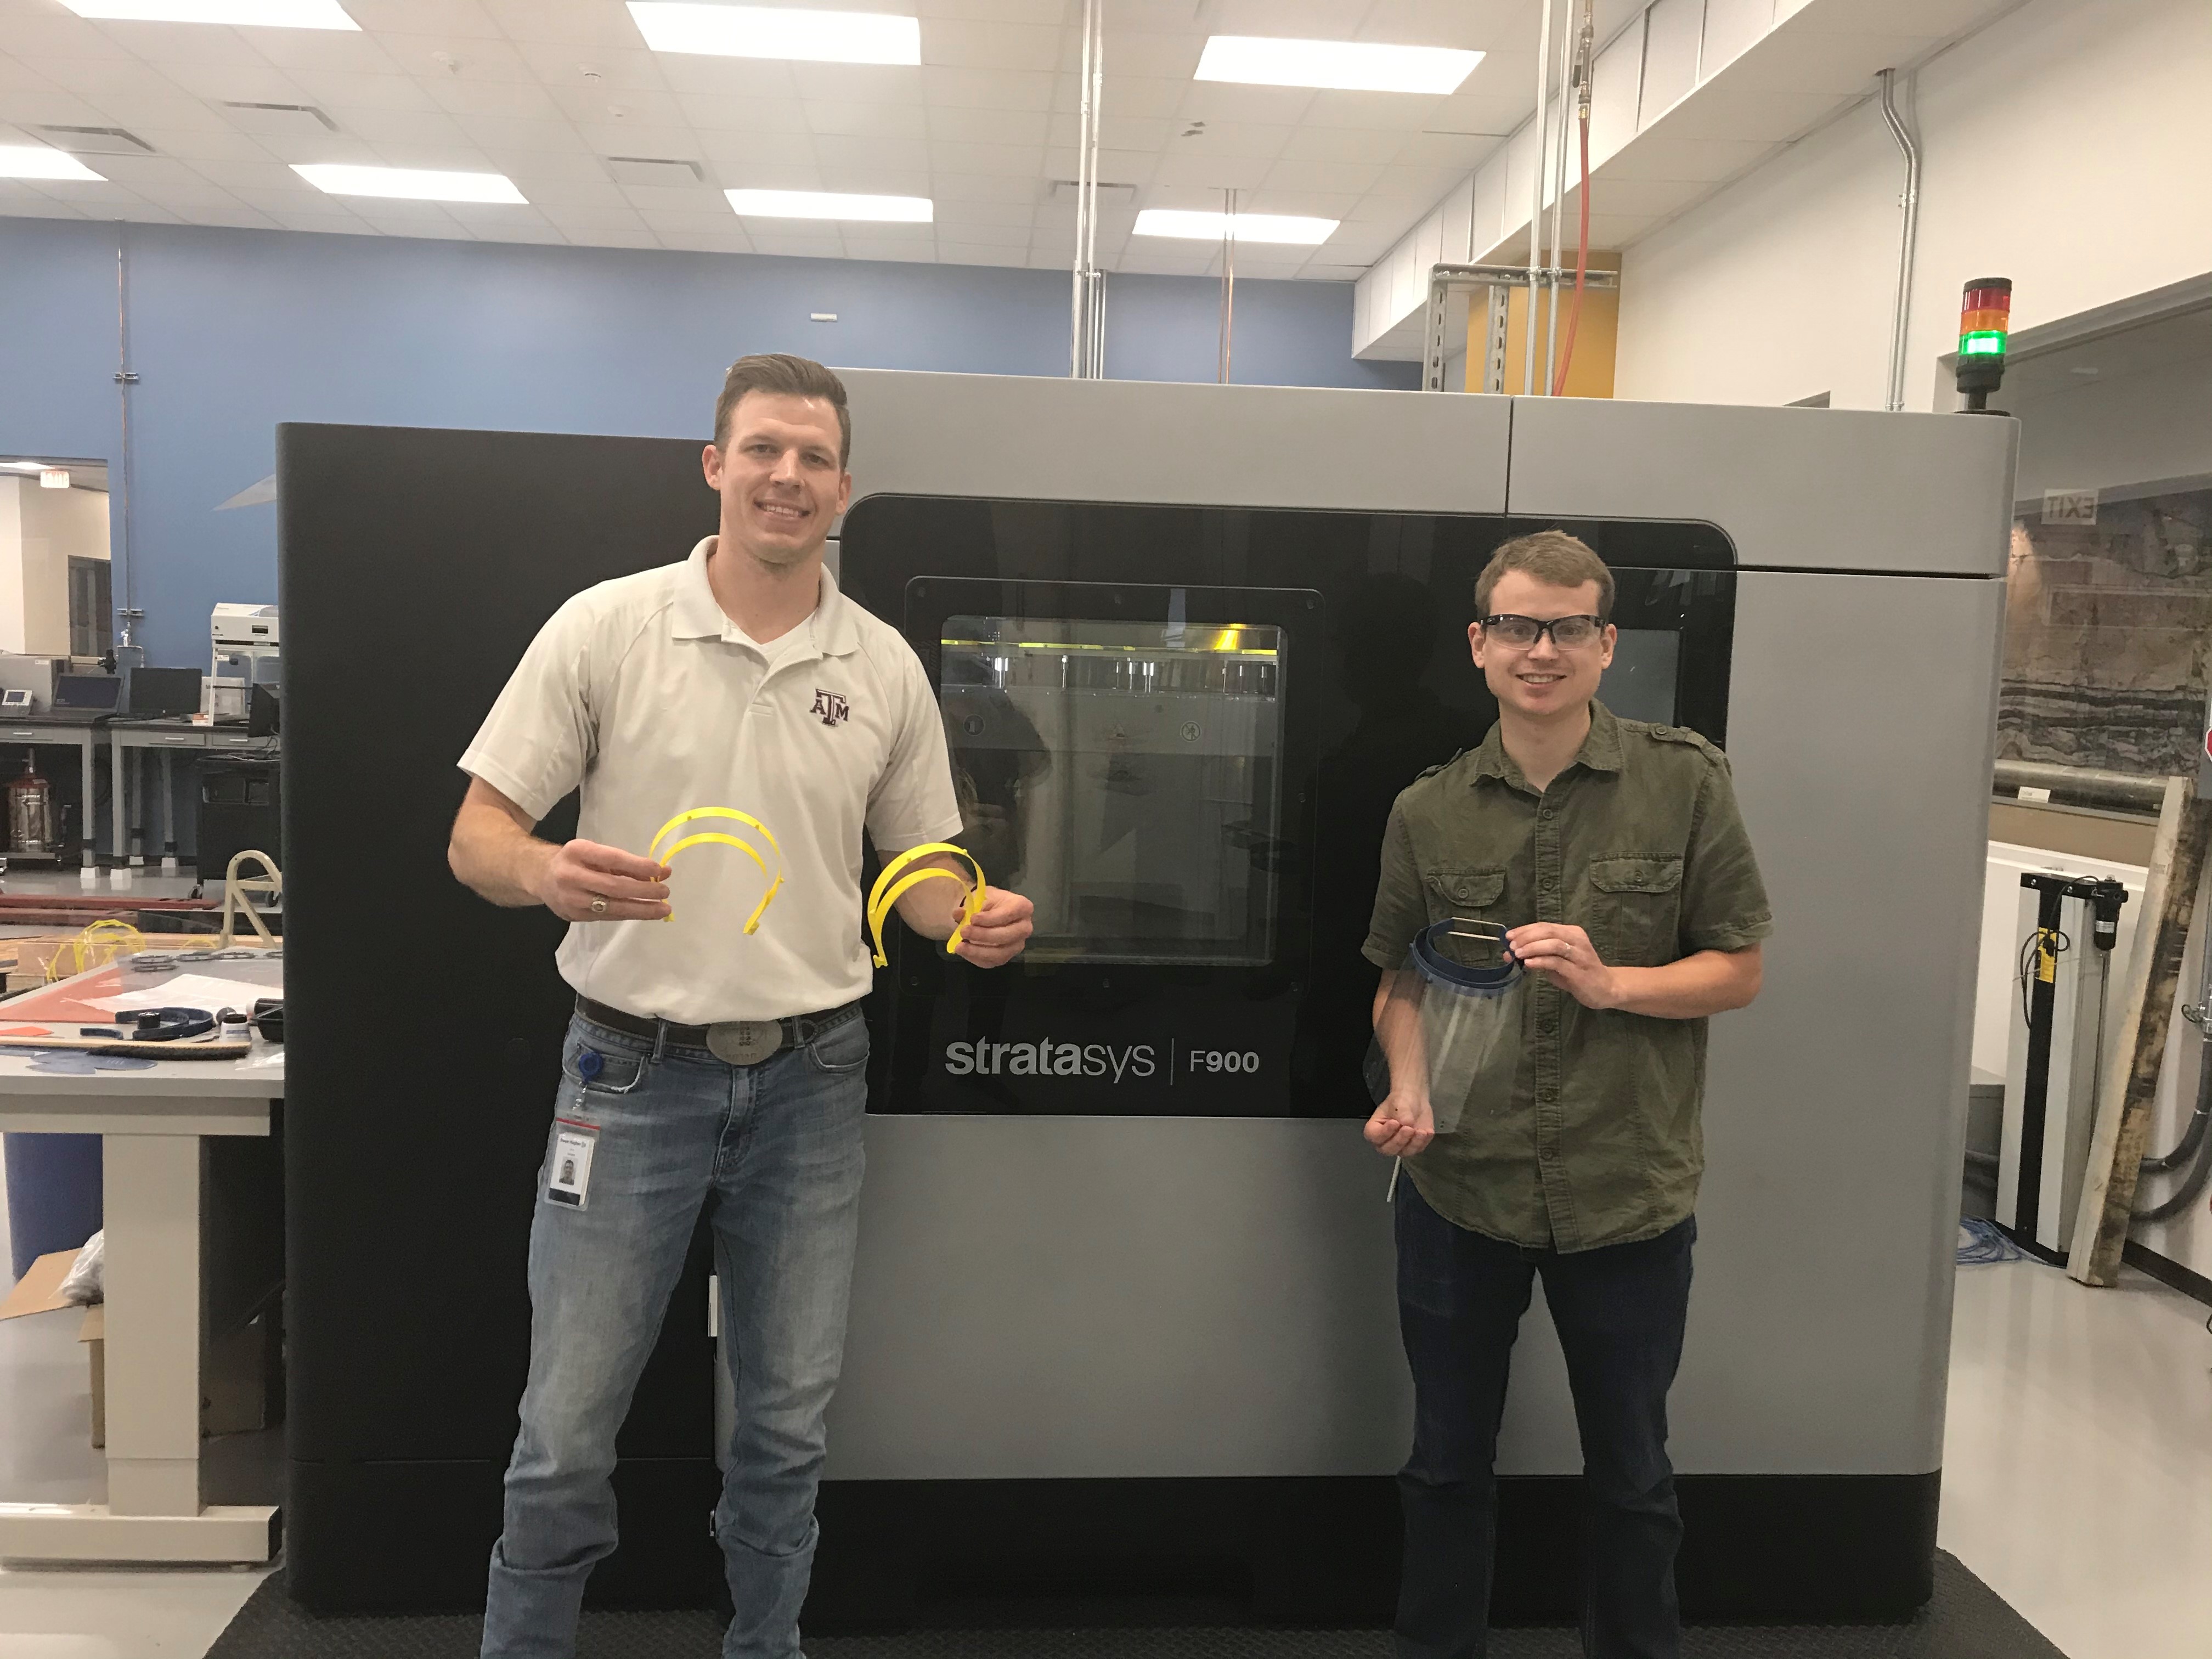 Two male Baker Hughes employees demonstrating 3D printed medical equipment